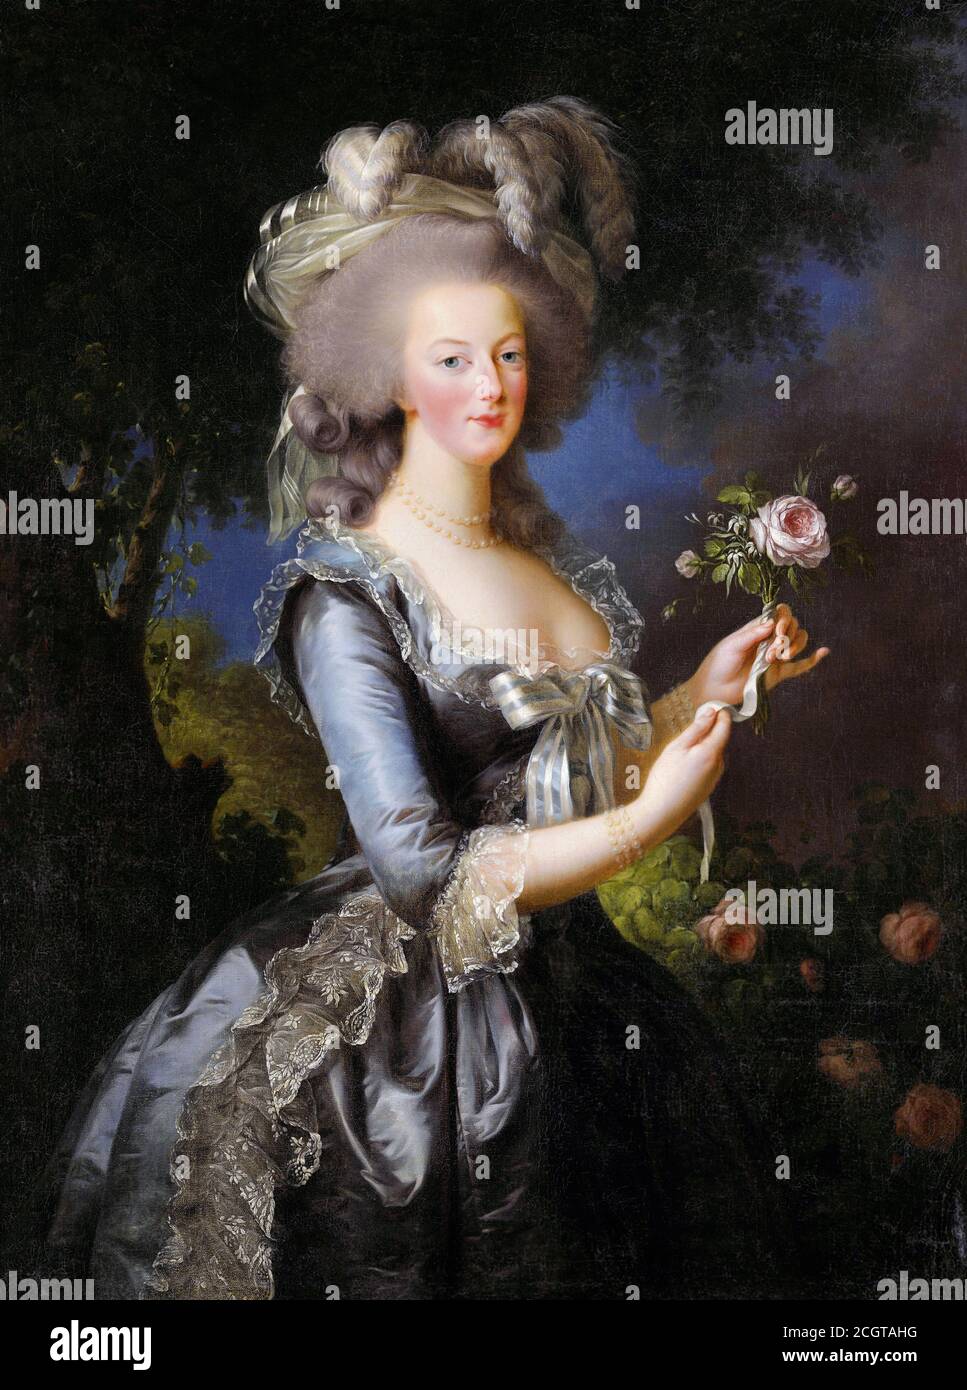 Marie Antoinette. Portrait of Marie-Antoinette (1755-1793), Queen of France and wife of King Louis XVI, by Élisabeth Vigée Le Brun, oil on canvas, 1783. Stock Photo